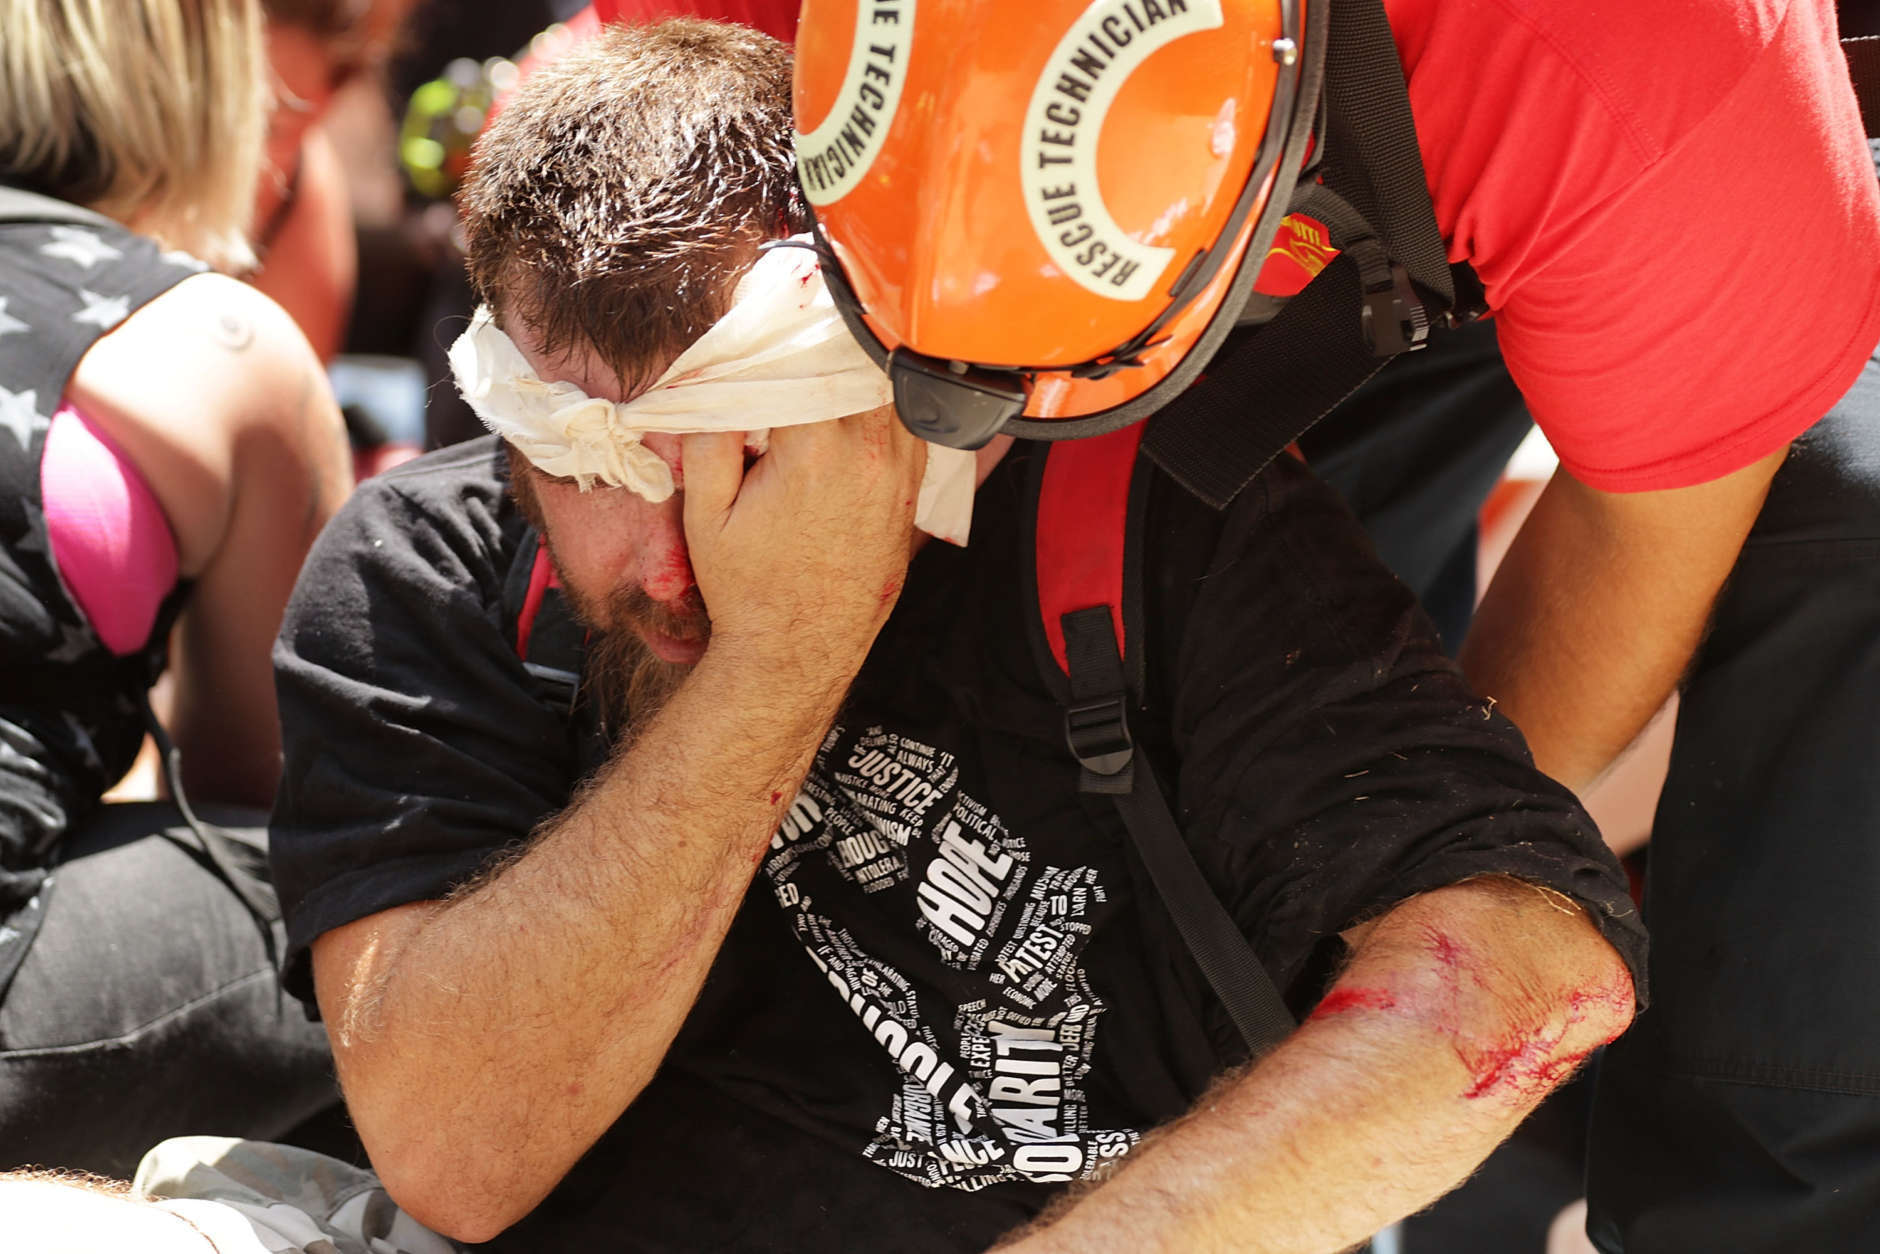 CHARLOTTESVILLE, VA - AUGUST 12:  Rescue workers and medics tend to many people who were injured when a car plowed through a crowd of anti-facist counter-demonstrators marching through the downtown shopping district August 12, 2017 in Charlottesville, Virginia. The car plowed through the crowed following the shutdown of the "Unite the Right" rally by police after white nationalists, neo-Nazis and members of the "alt-right" and counter-protesters clashed near Emancipation Park, where a statue of Confederate General Robert E. Lee is slated to be removed.  (Photo by Chip Somodevilla/Getty Images)